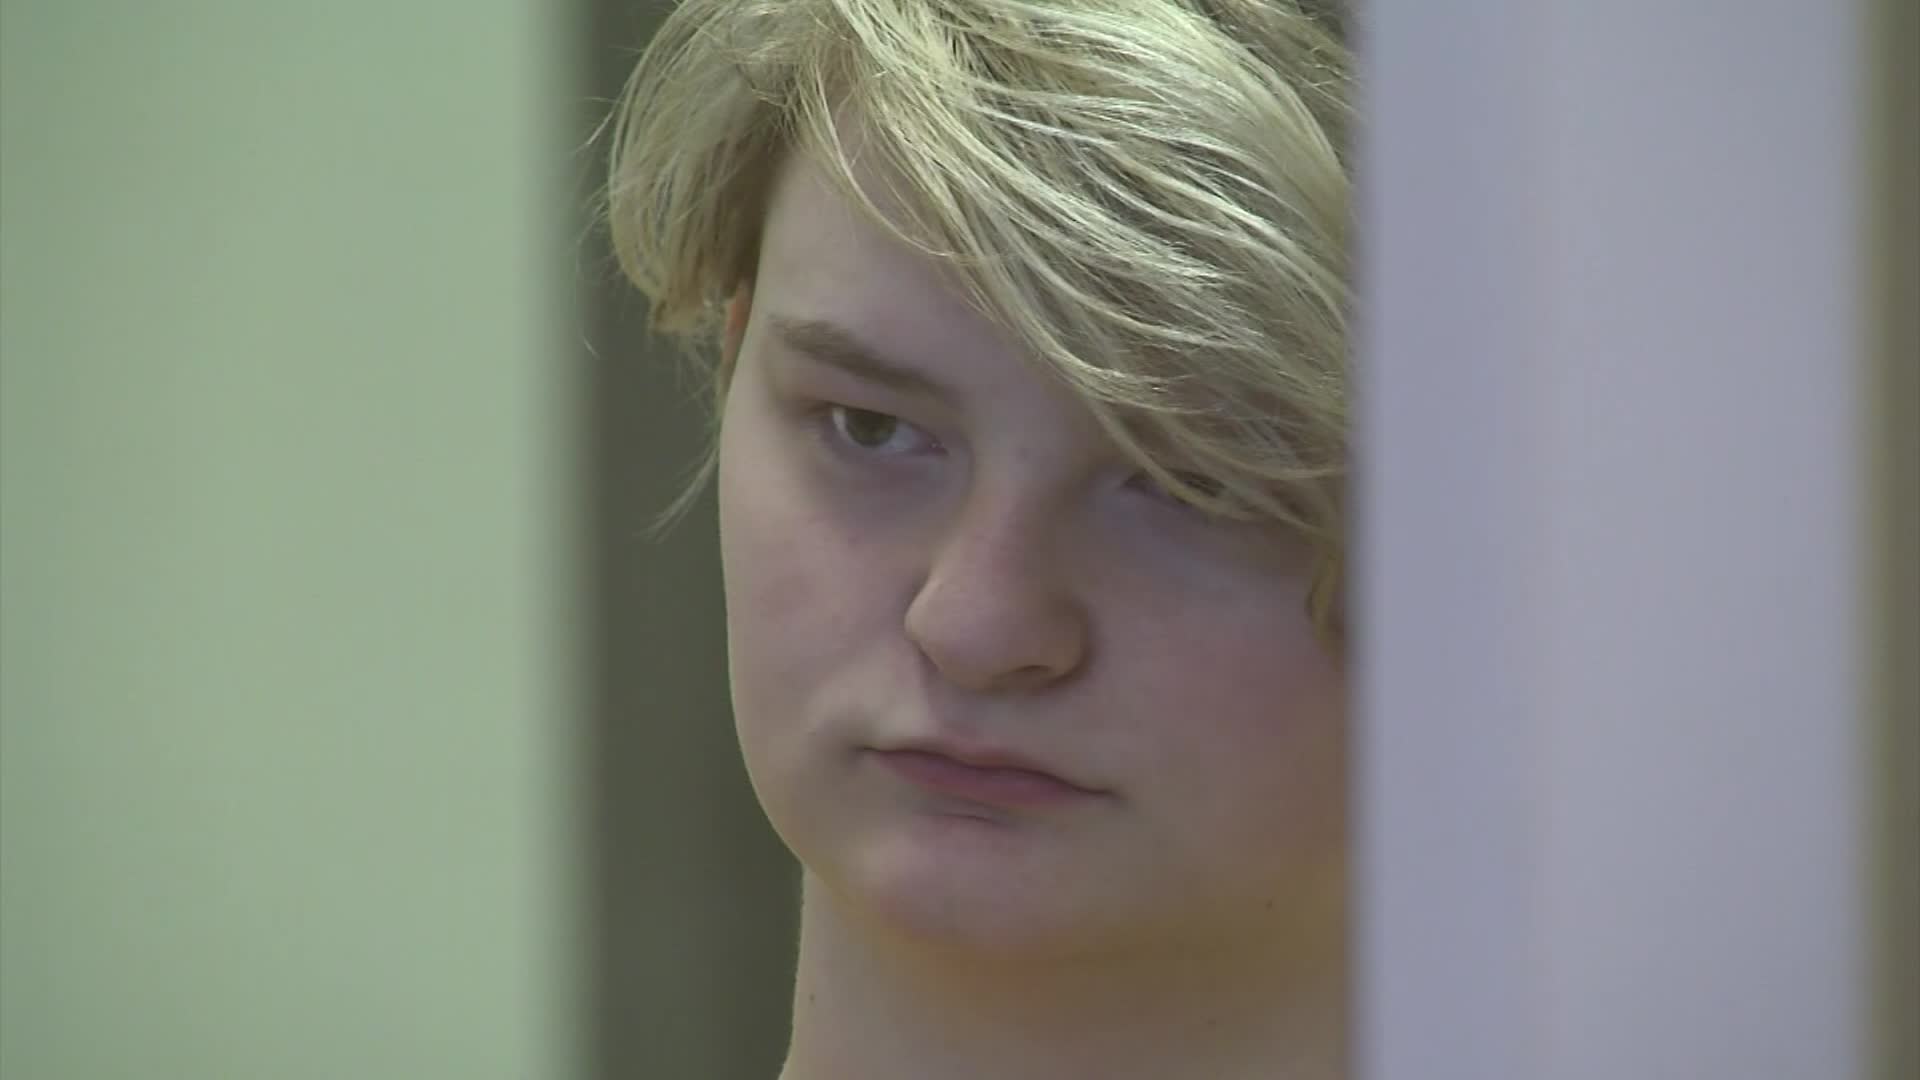 Defloration Rape - An Alaska teen is accused of killing her friend after a man she met online  told her he'd pay $9 million for videos of the murder | CNN